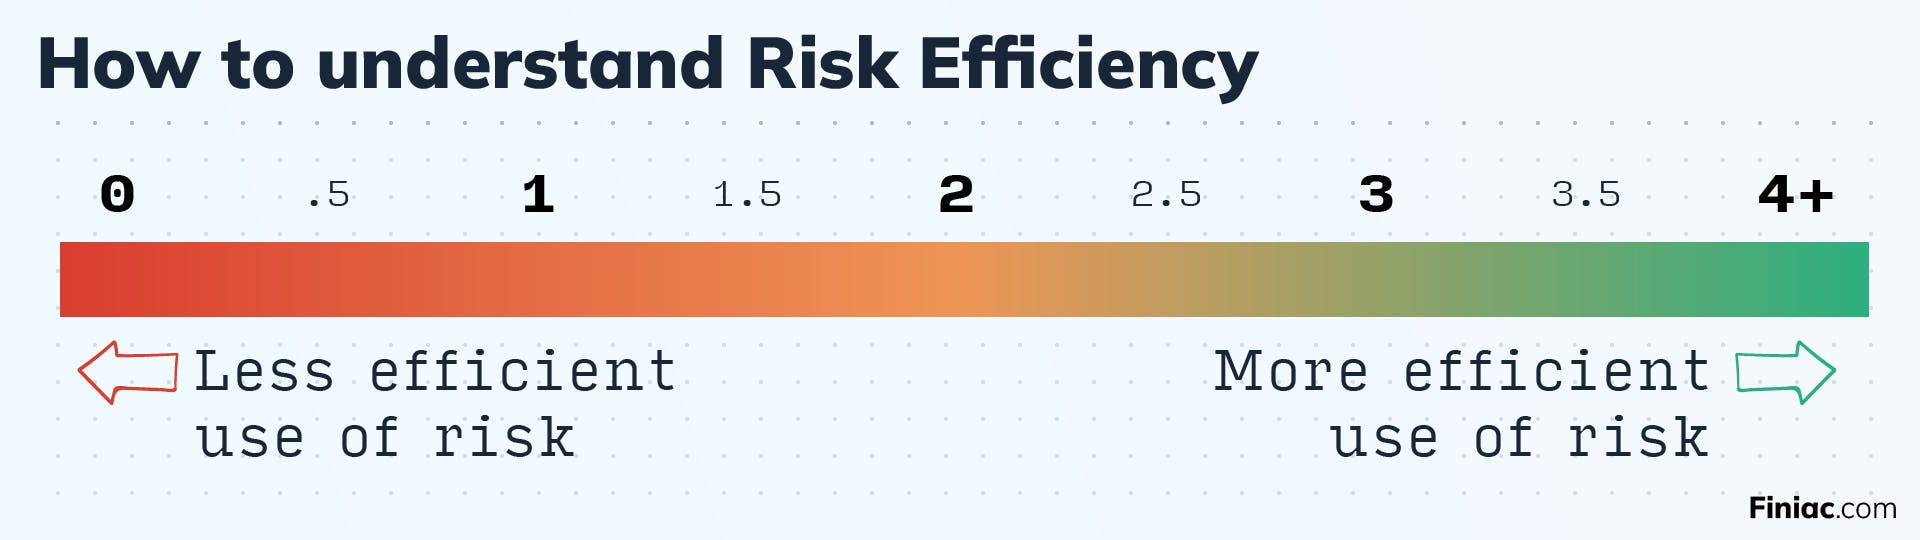 Infographic explaining how to read Finiac's Risk Efficiency metric.